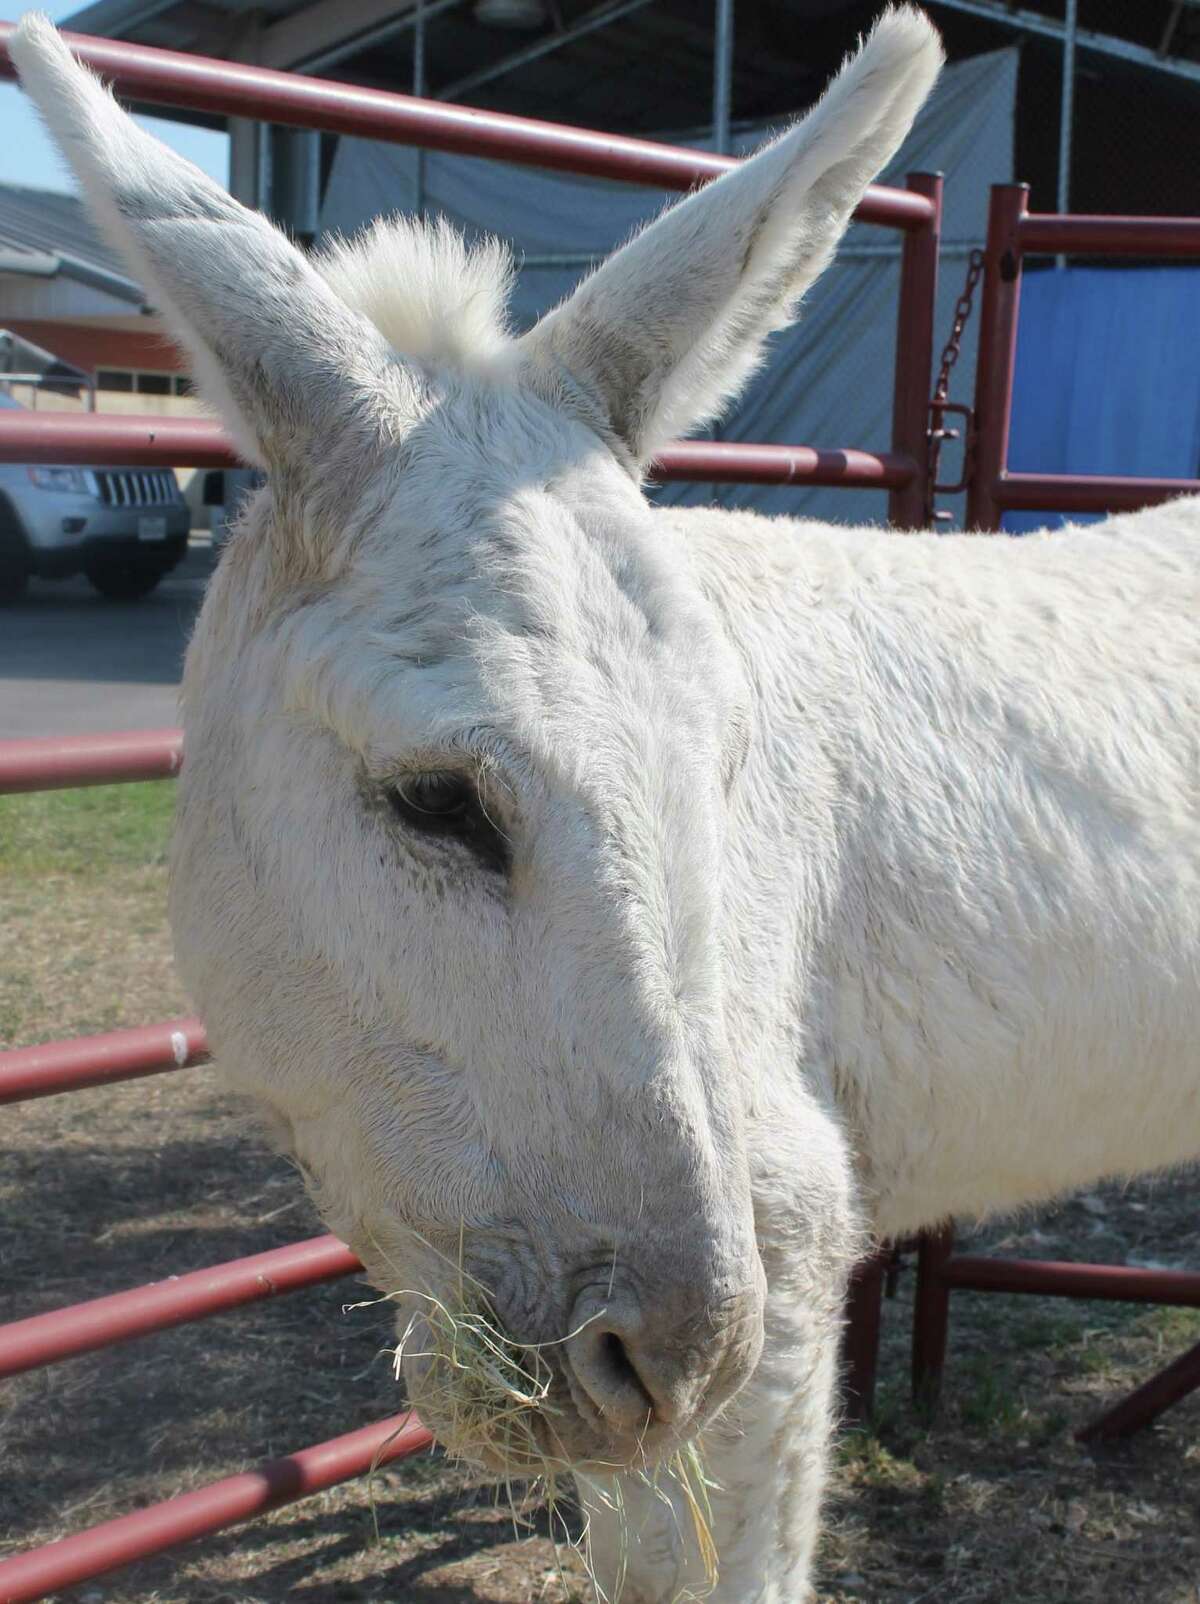 The first calls came in about 7 a.m., when people spotted the donkey in the grassy area along the intersection of Wurzbach and Ingram Roads.